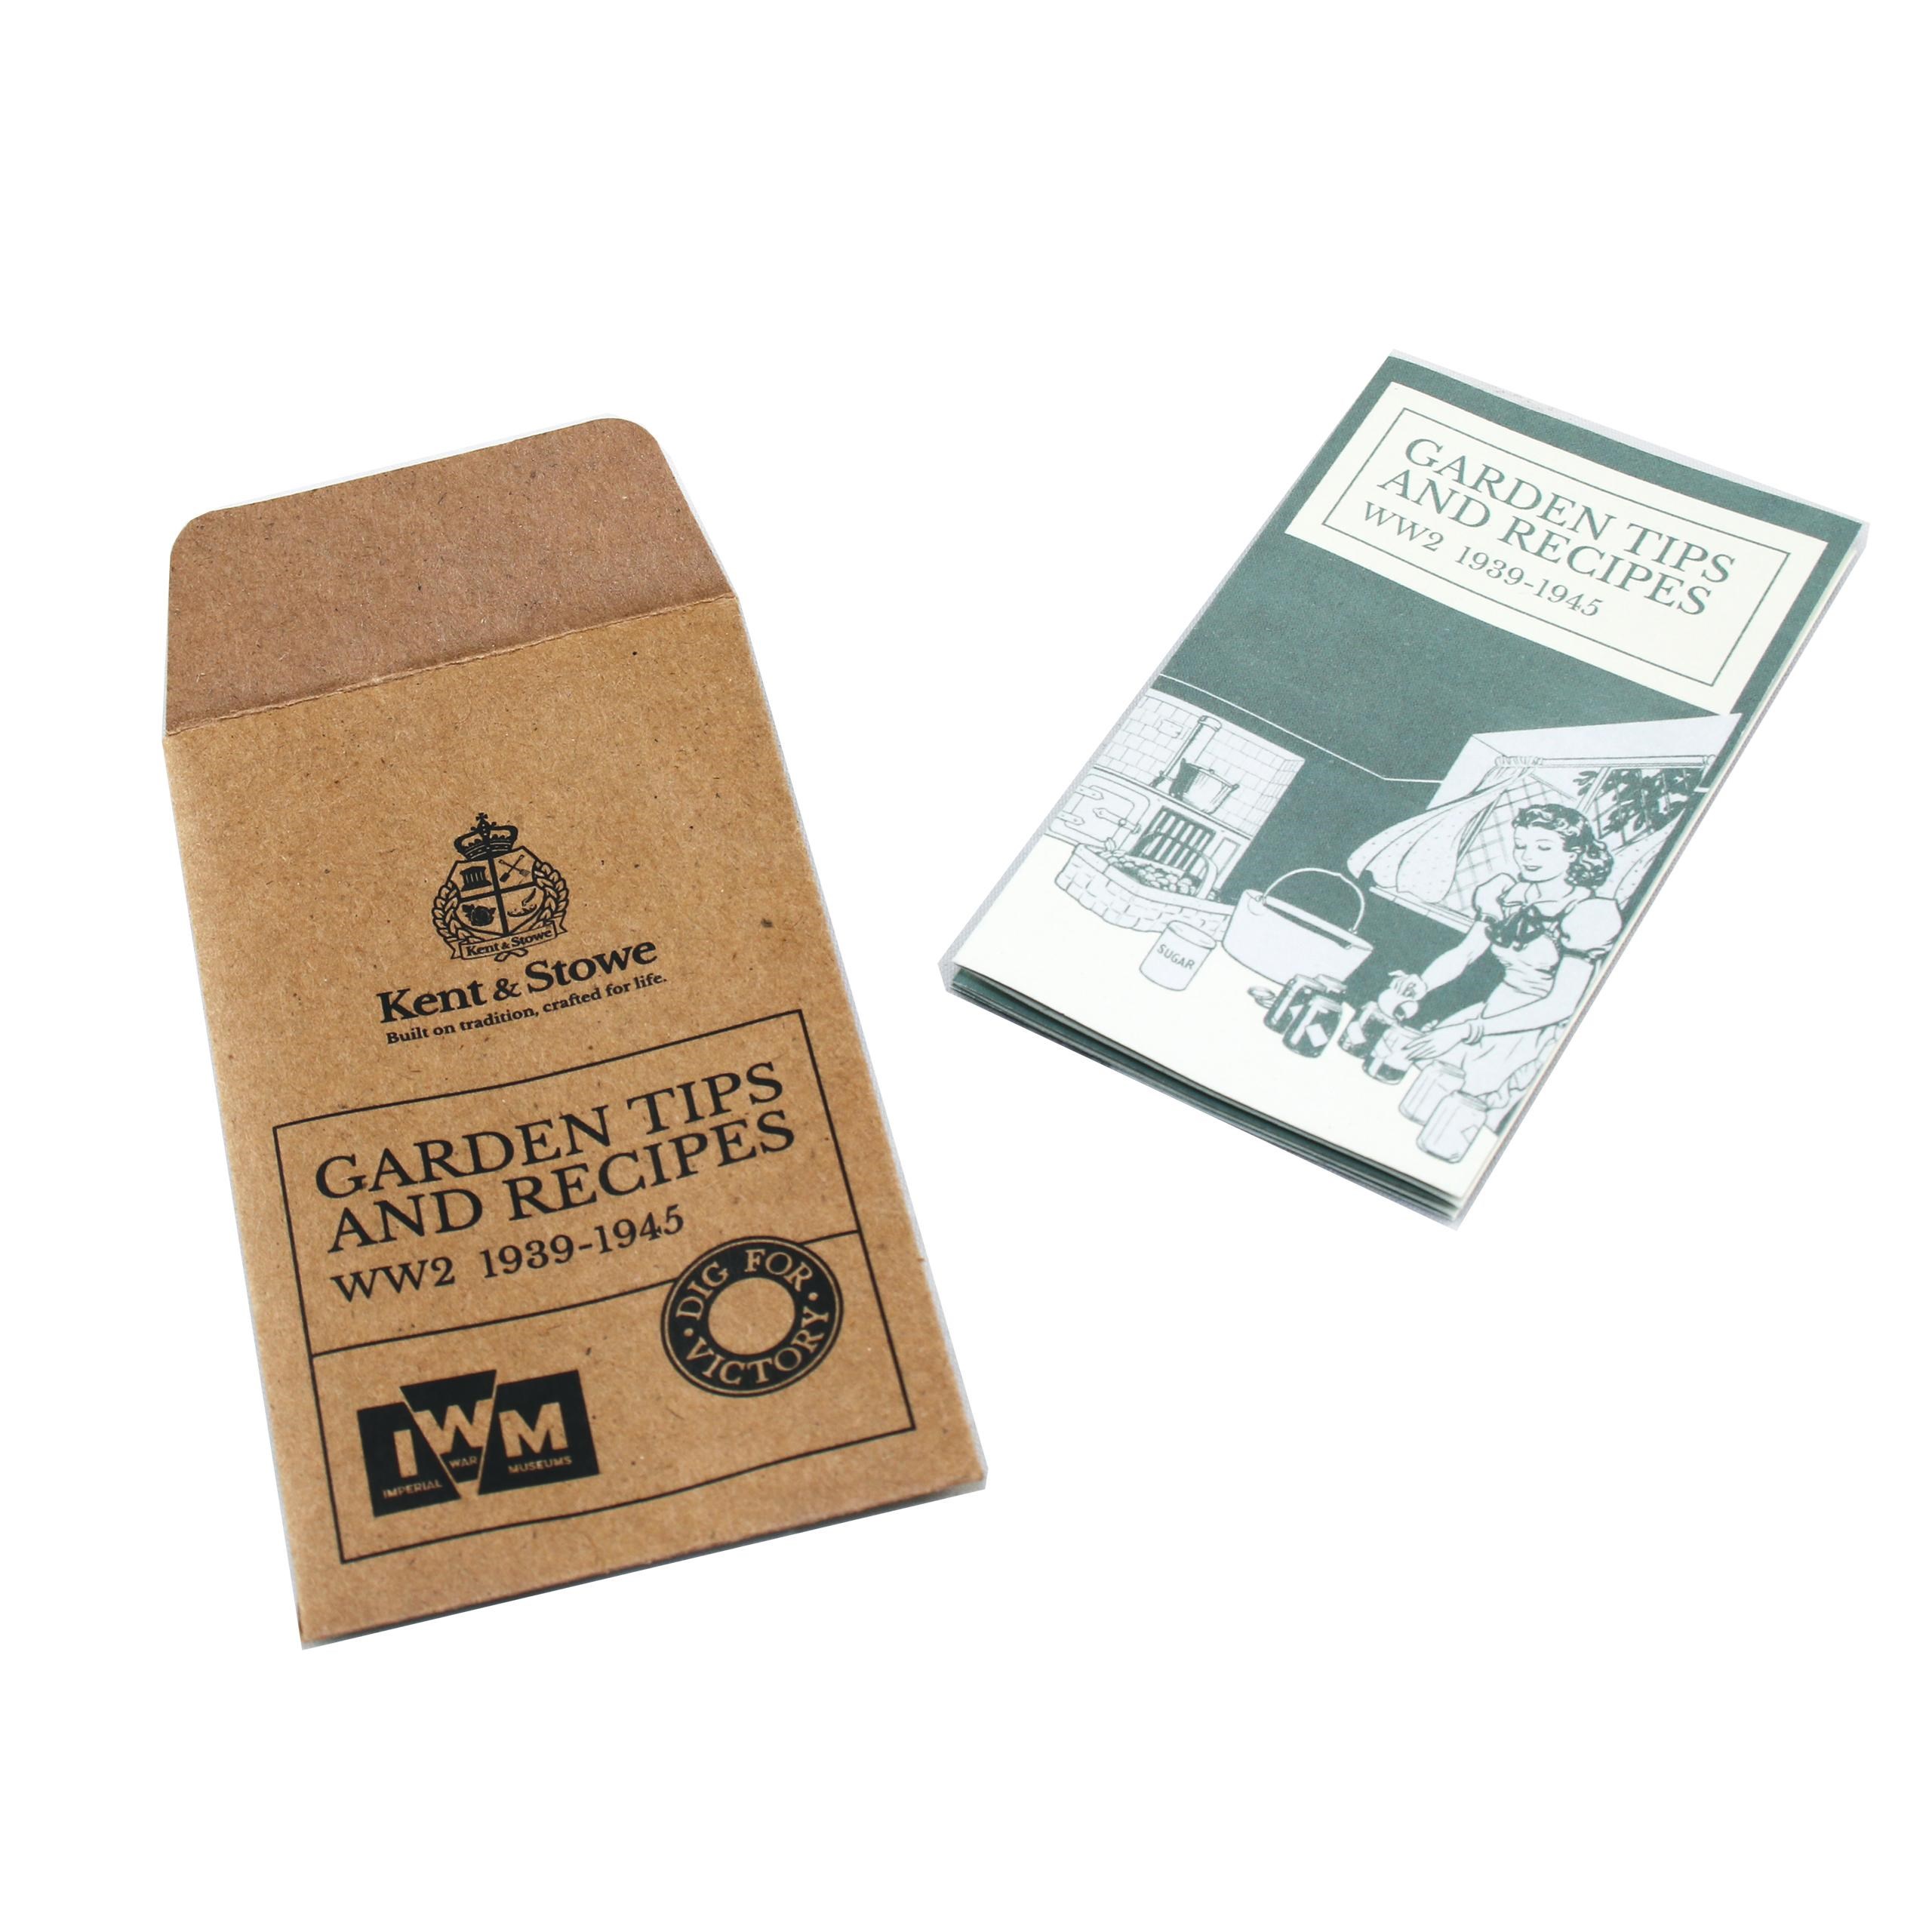 10cm Dig For Victory Gardeners Gift Pot by Kent & Stowe